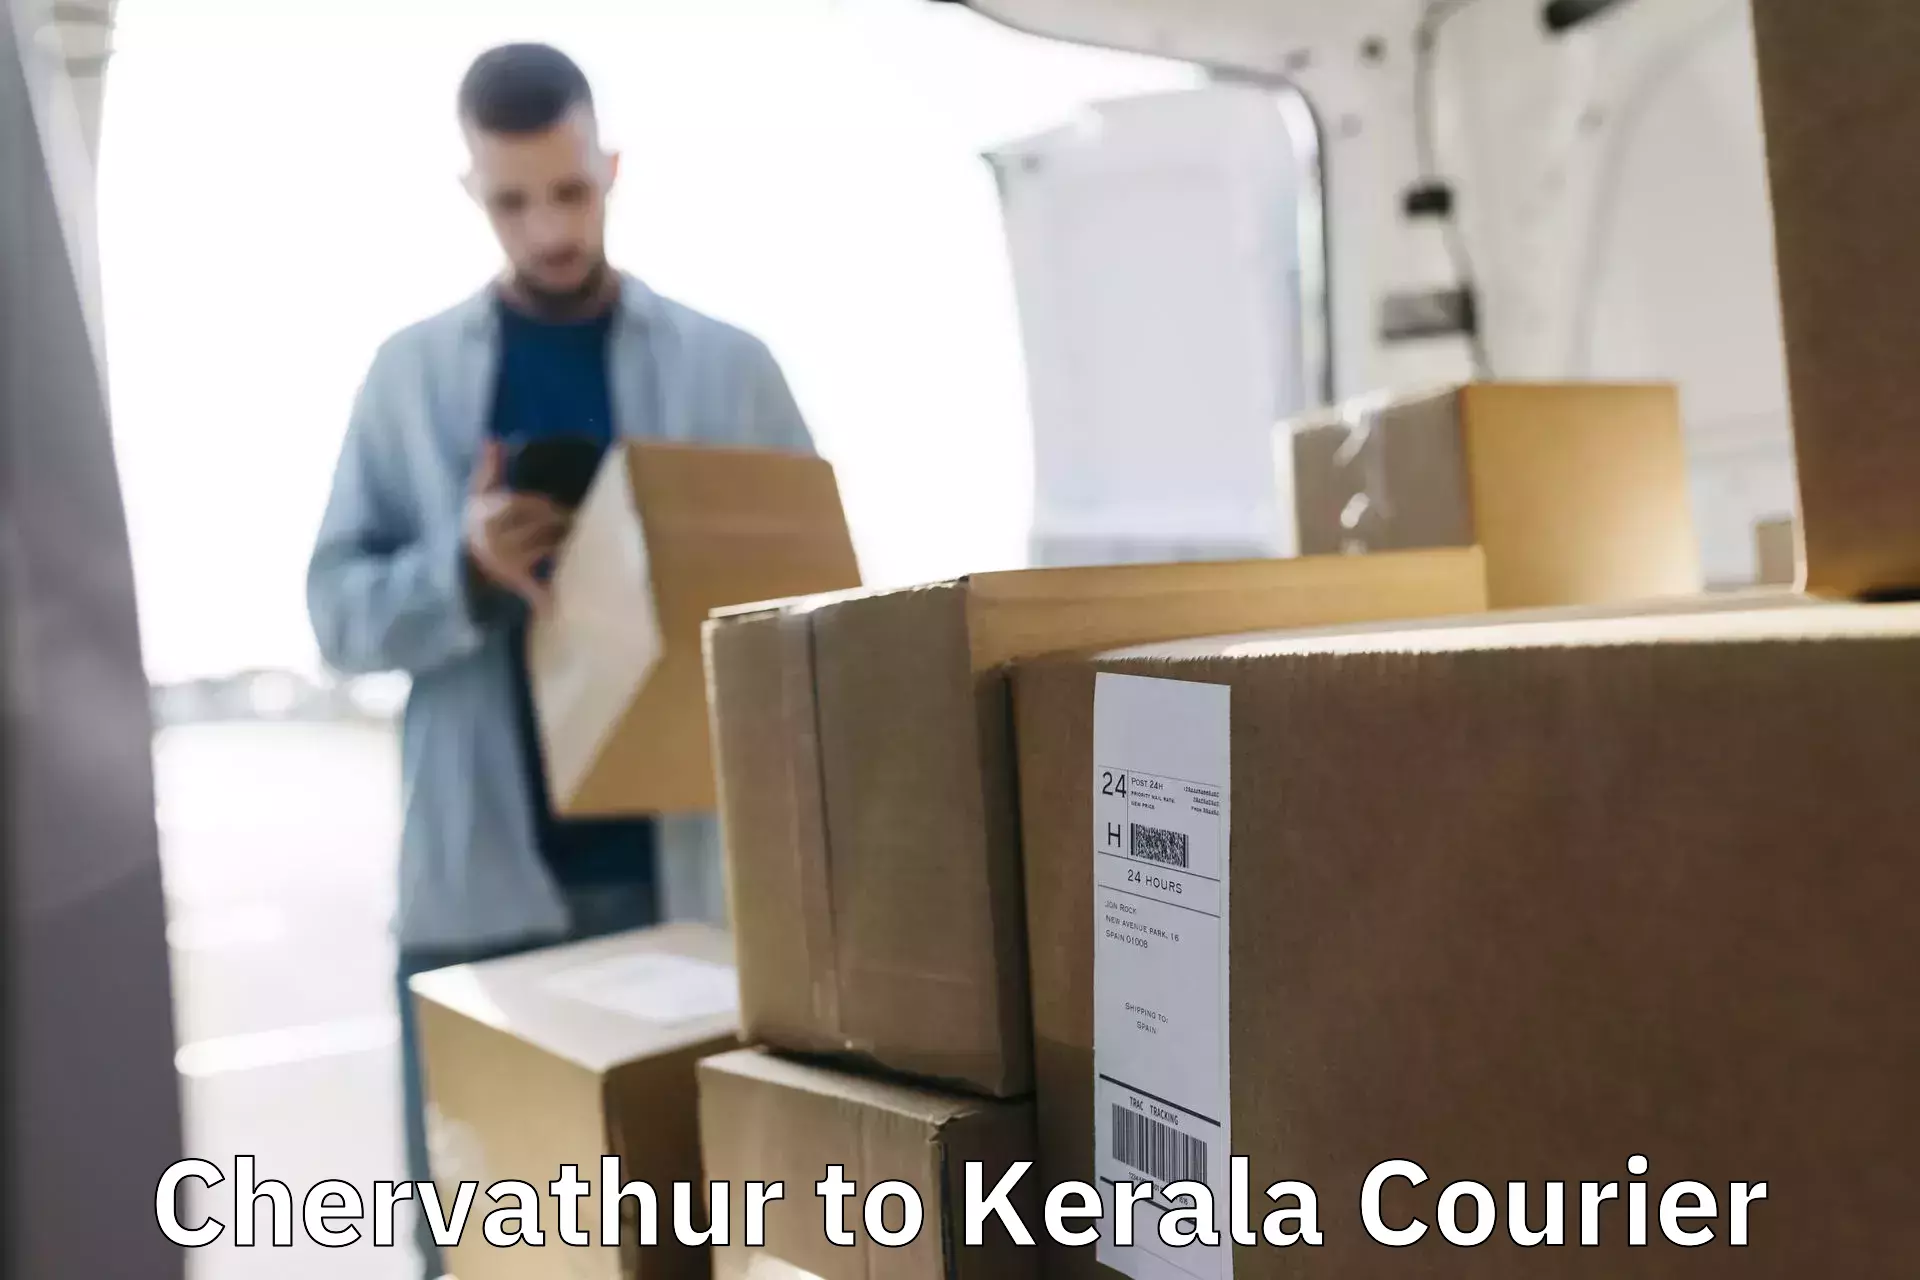 Door to door delivery Chervathur to Pathanamthitta